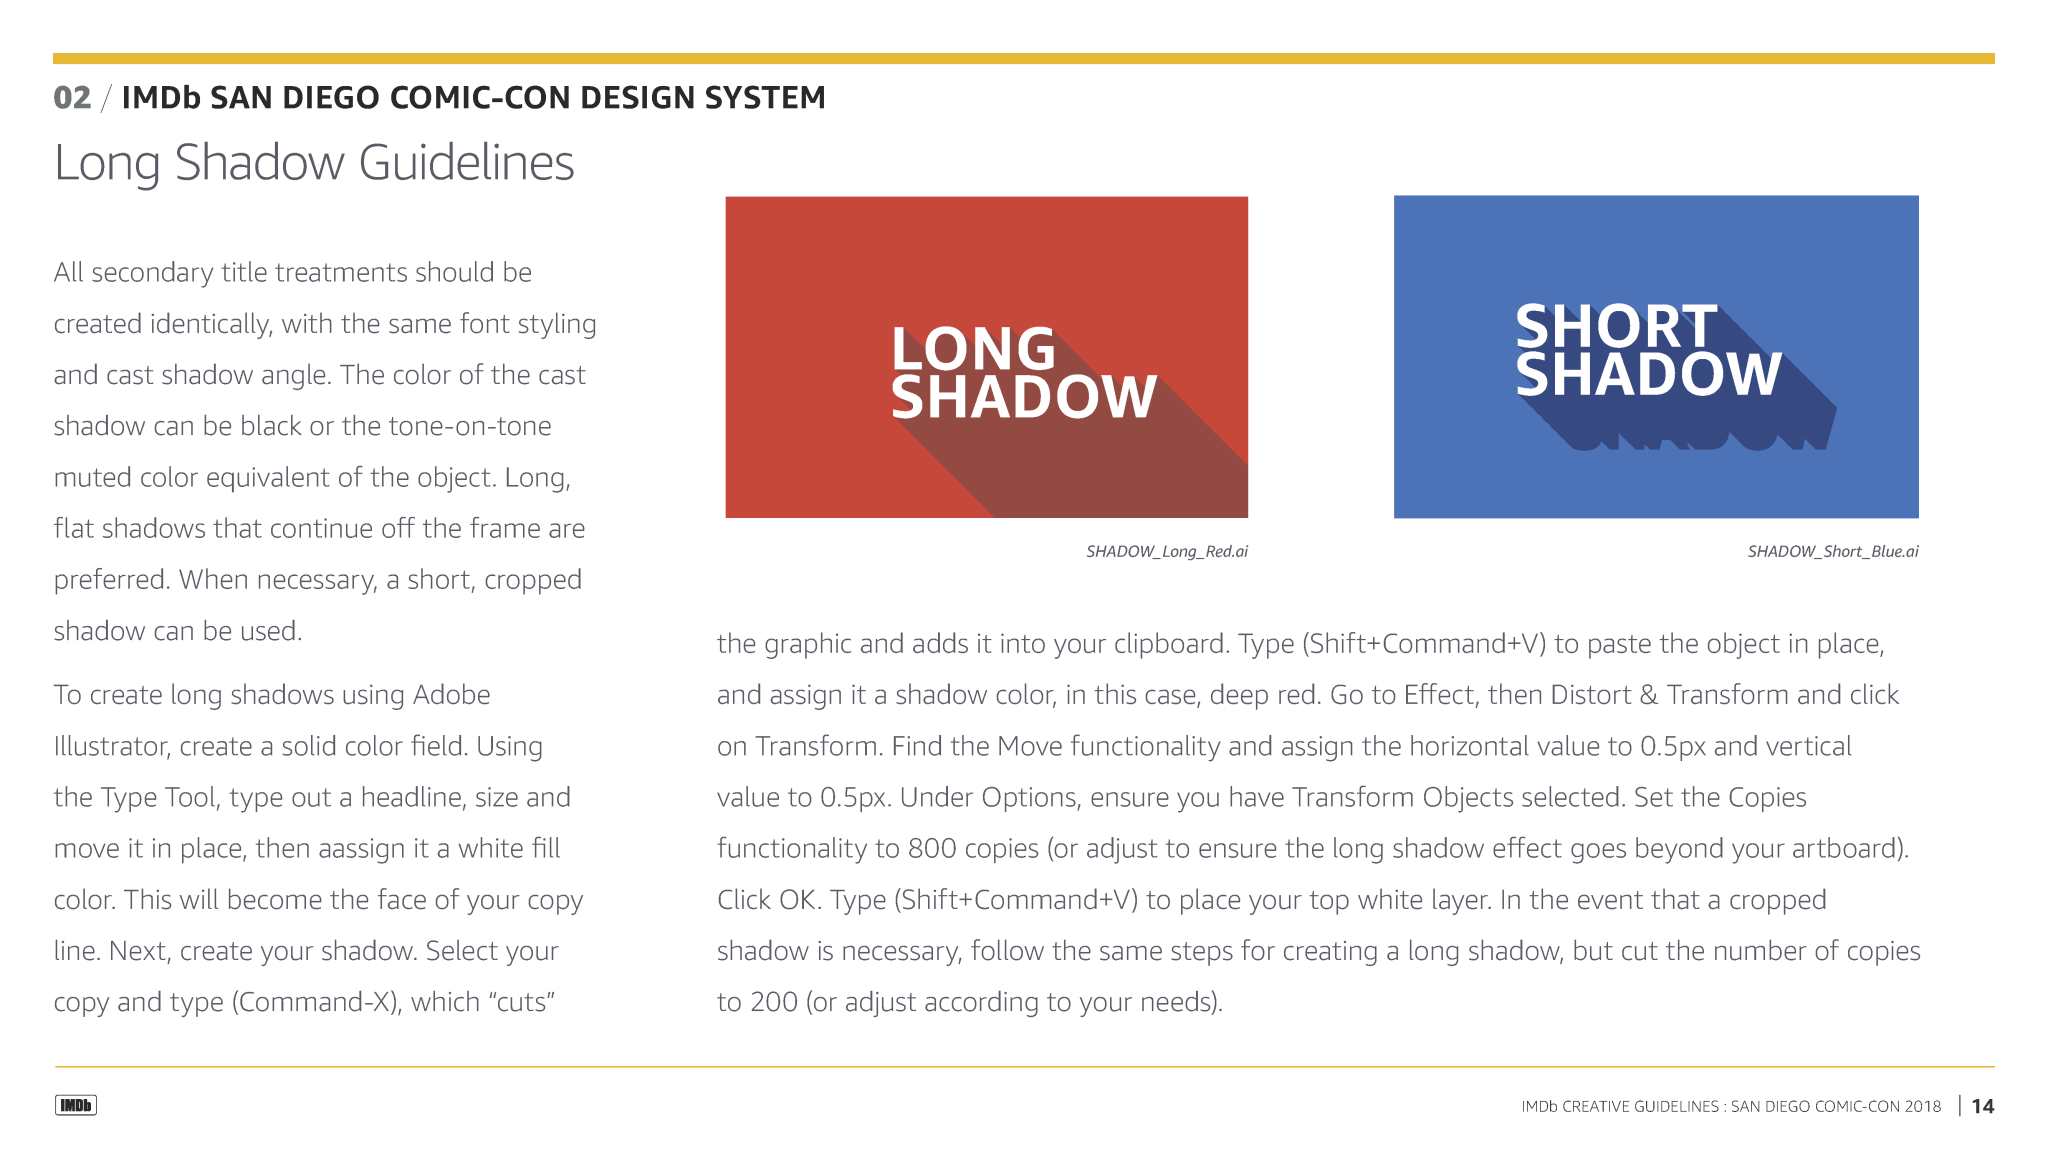 San Diego Comic-Con 2018 Shadow Guidelines